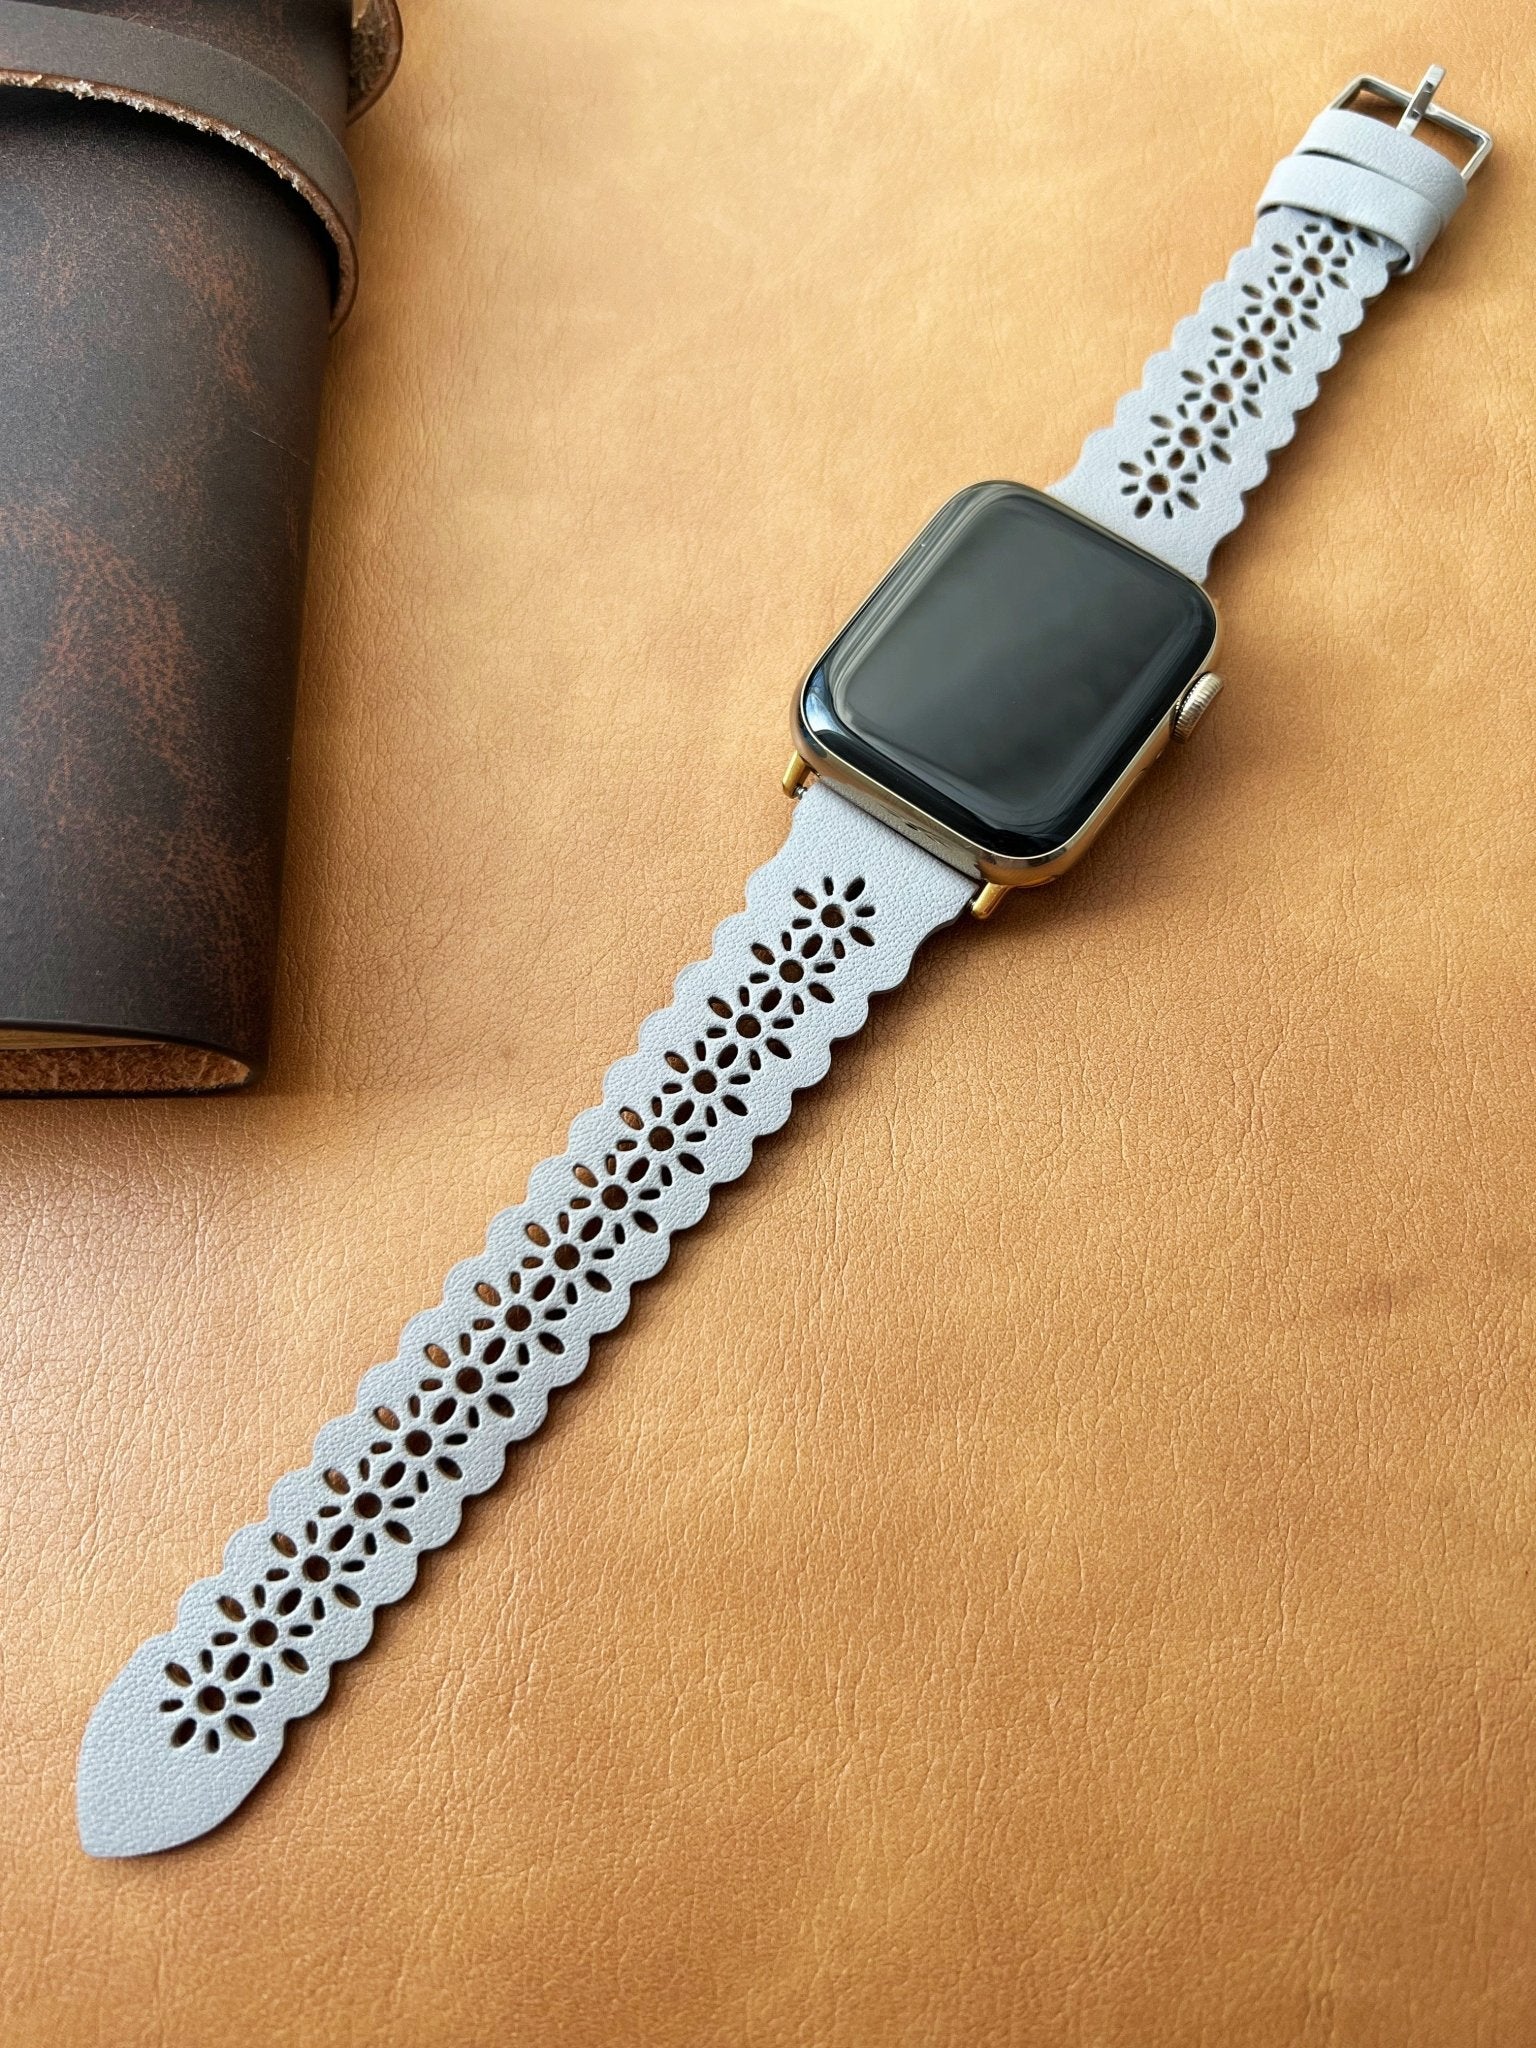 Off White Filigree Laser Cut Lace Leather Watch Band - Mareevo